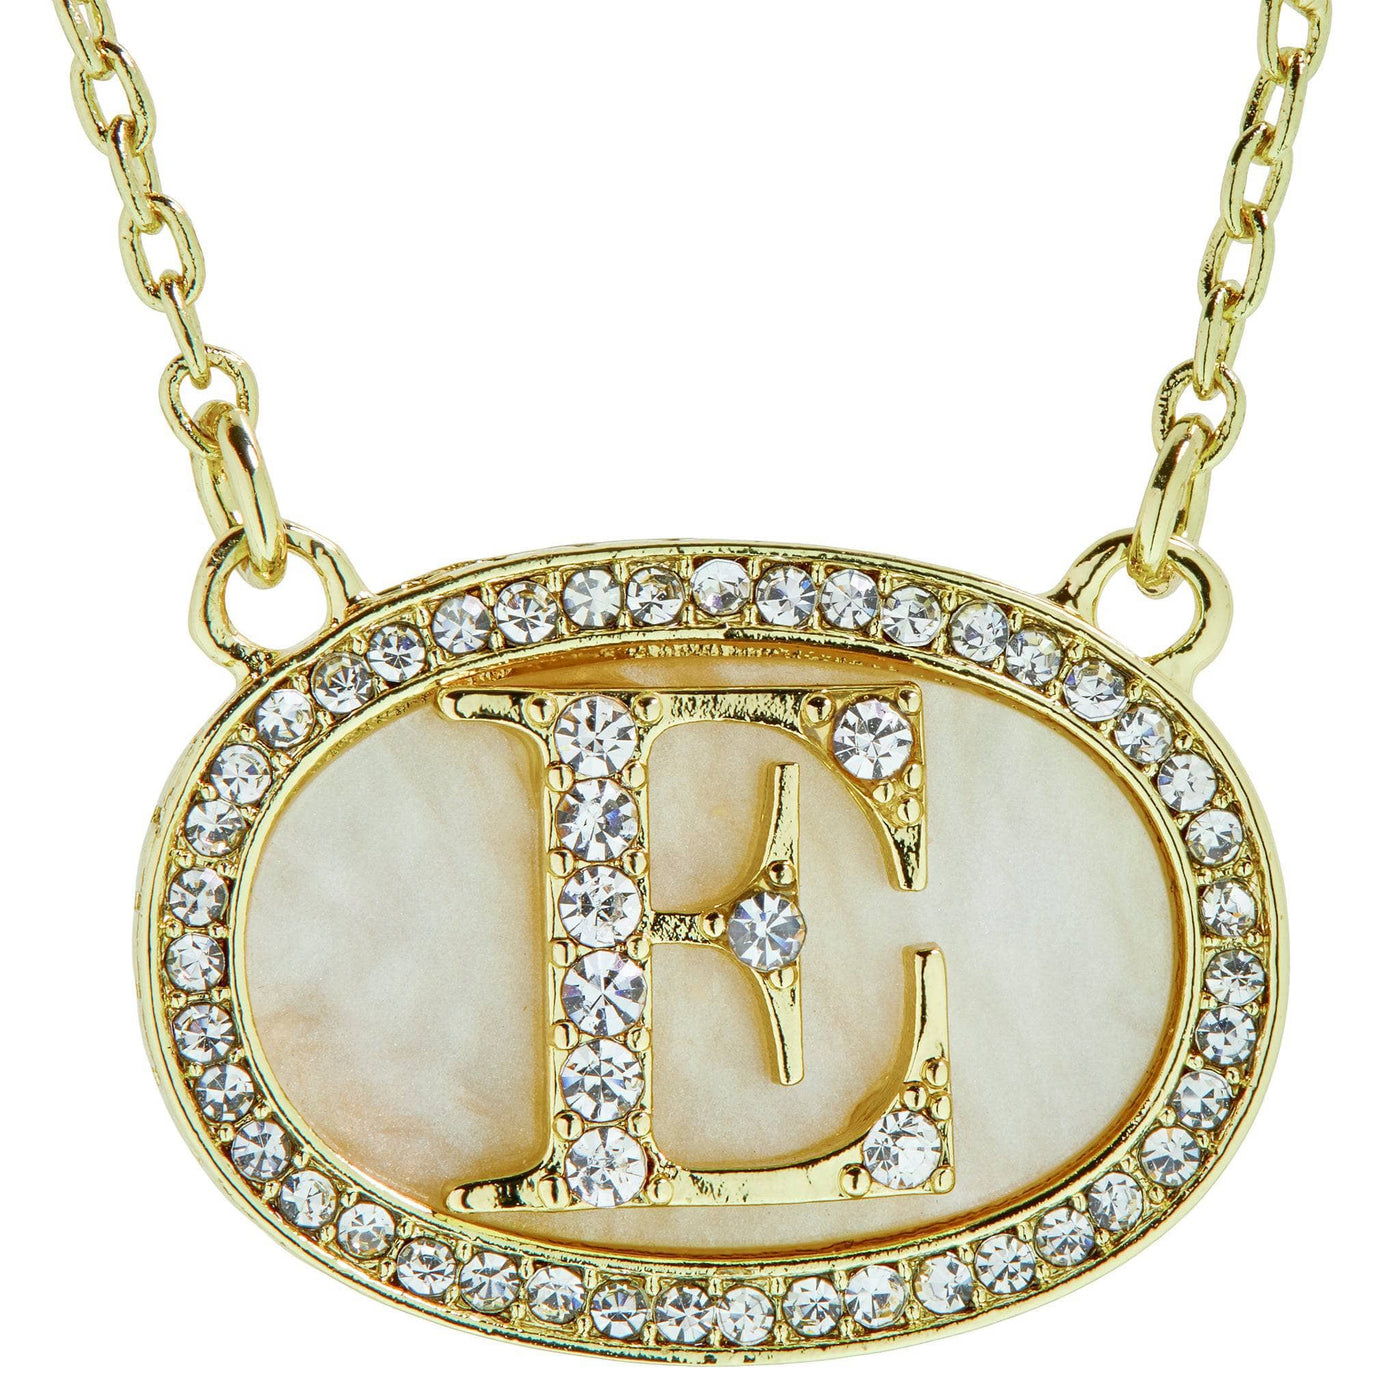 HEIDI DAUS® "Personal Touch" Chain MOP Faux Crystal Initial Necklace